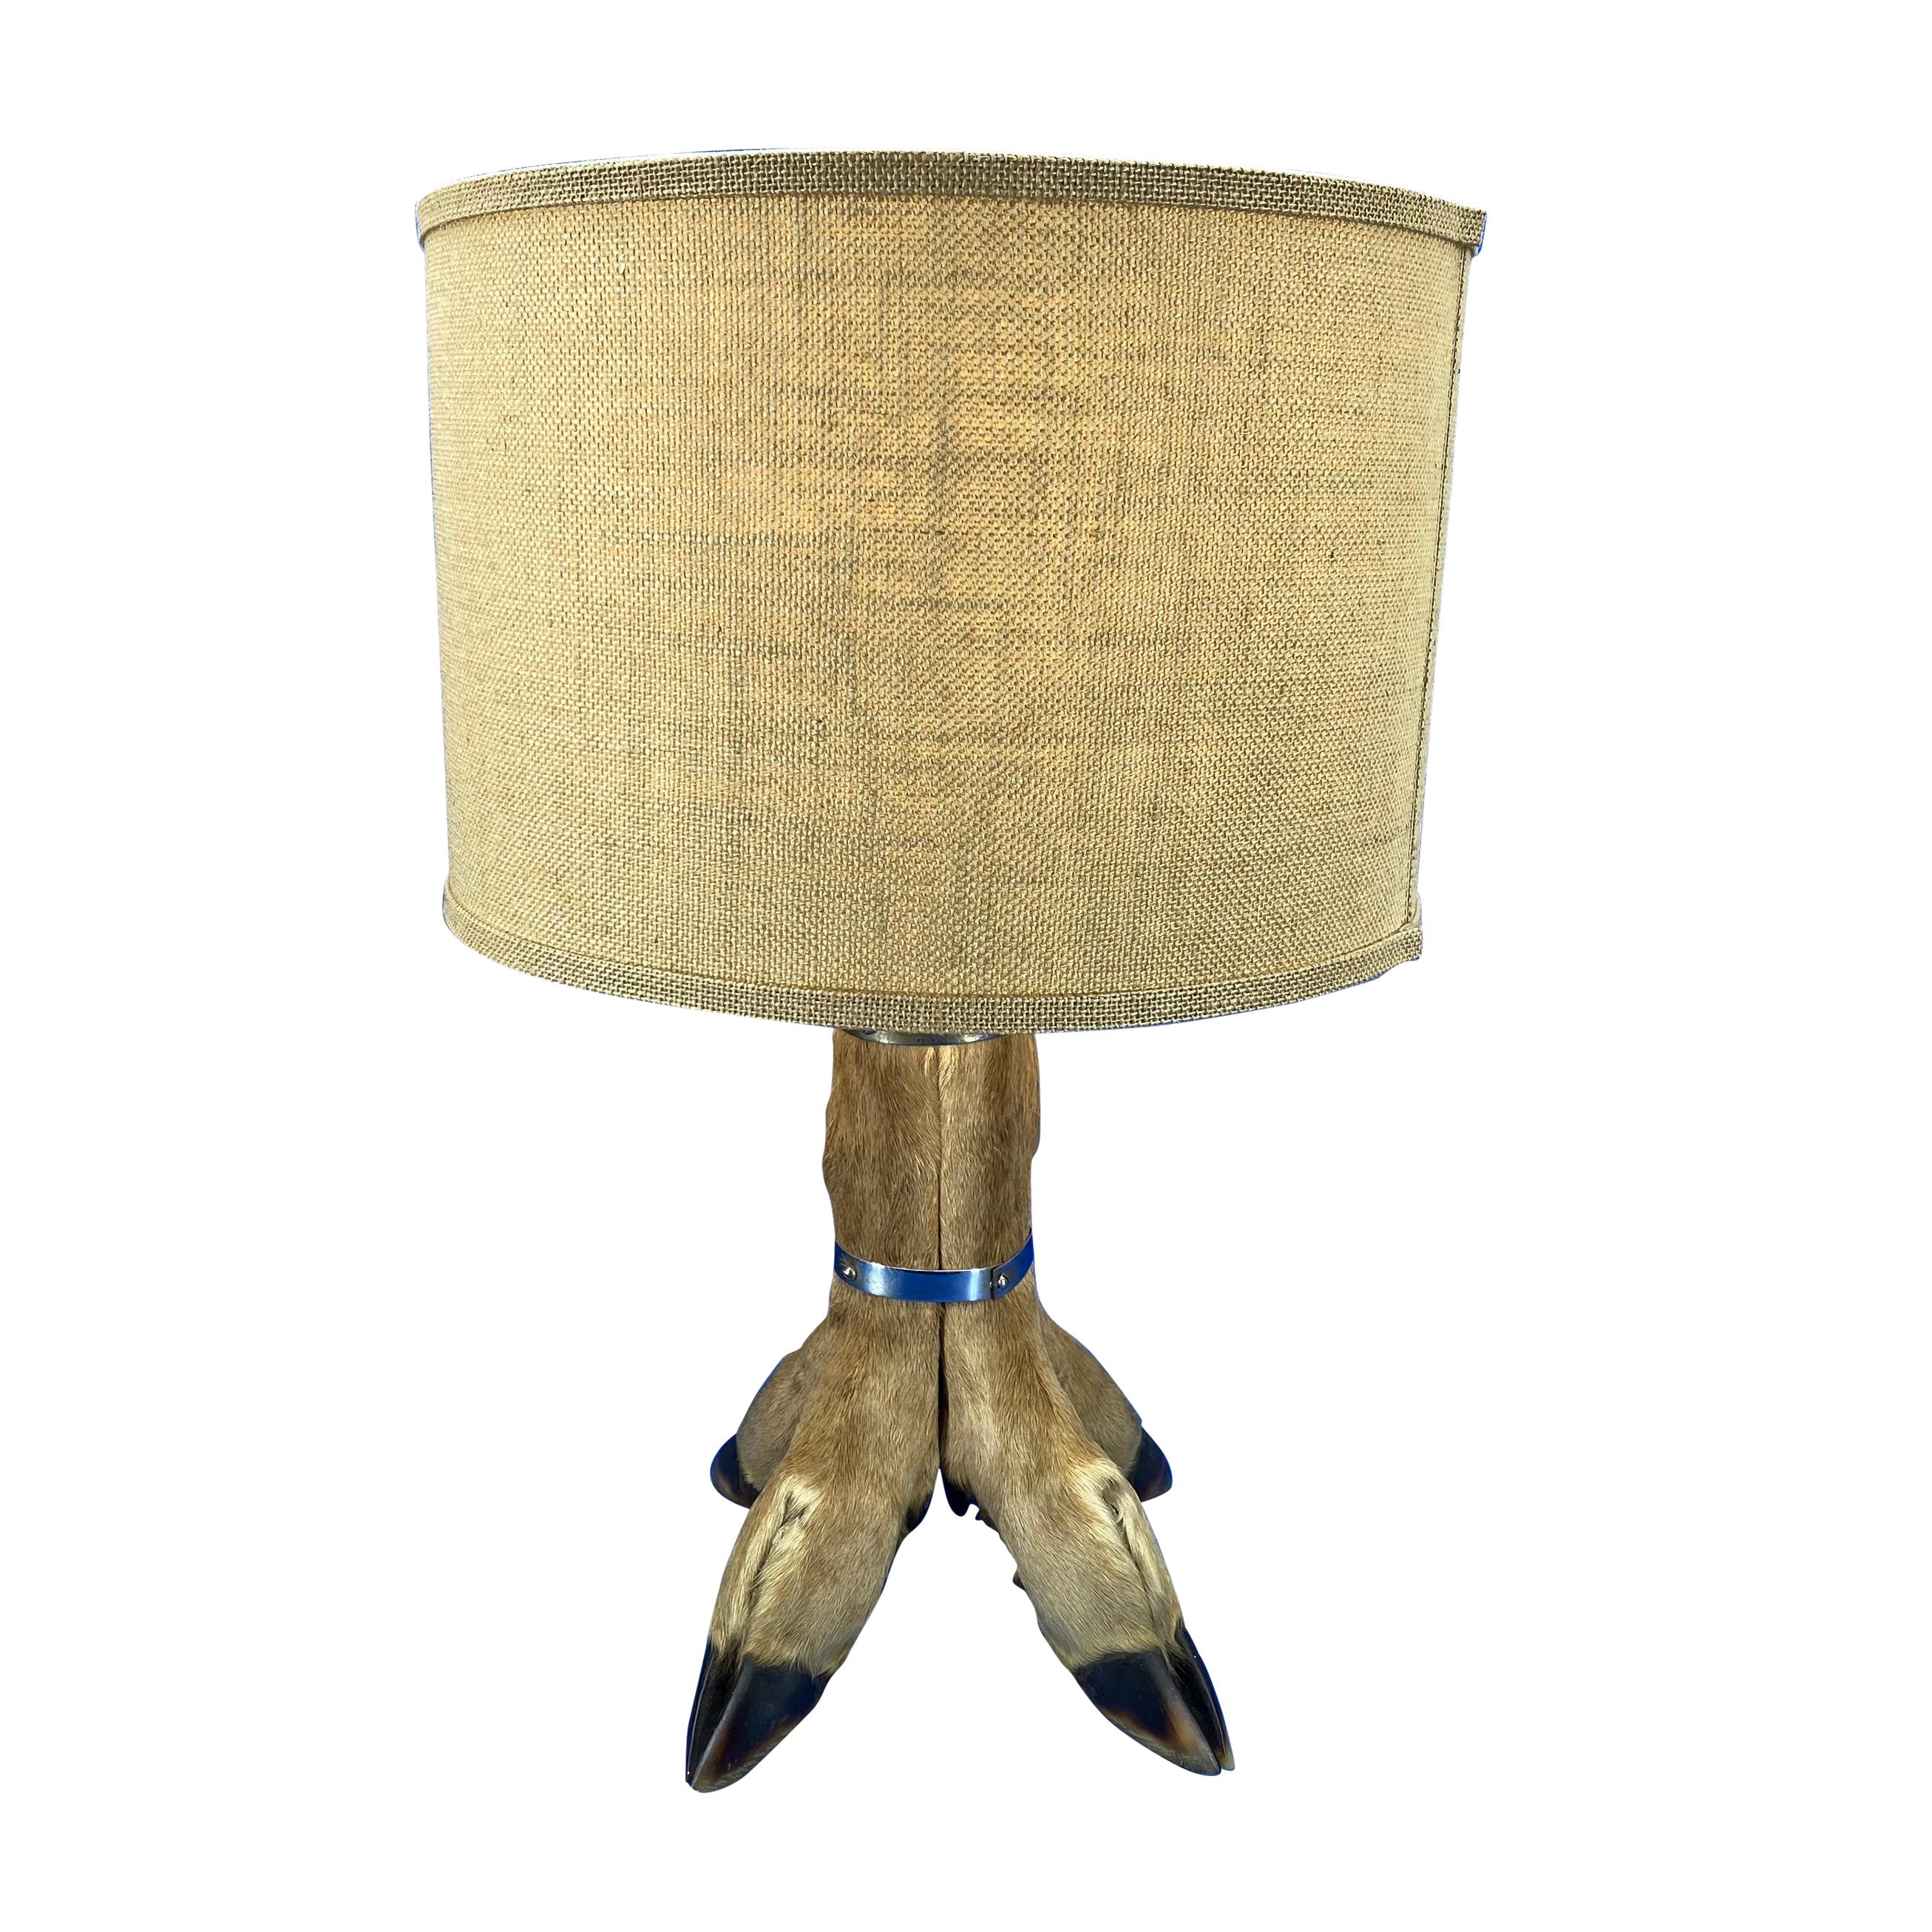 Table Lamp With 4 Tier Deer Hoof With Nickel Bands And Antler Finial